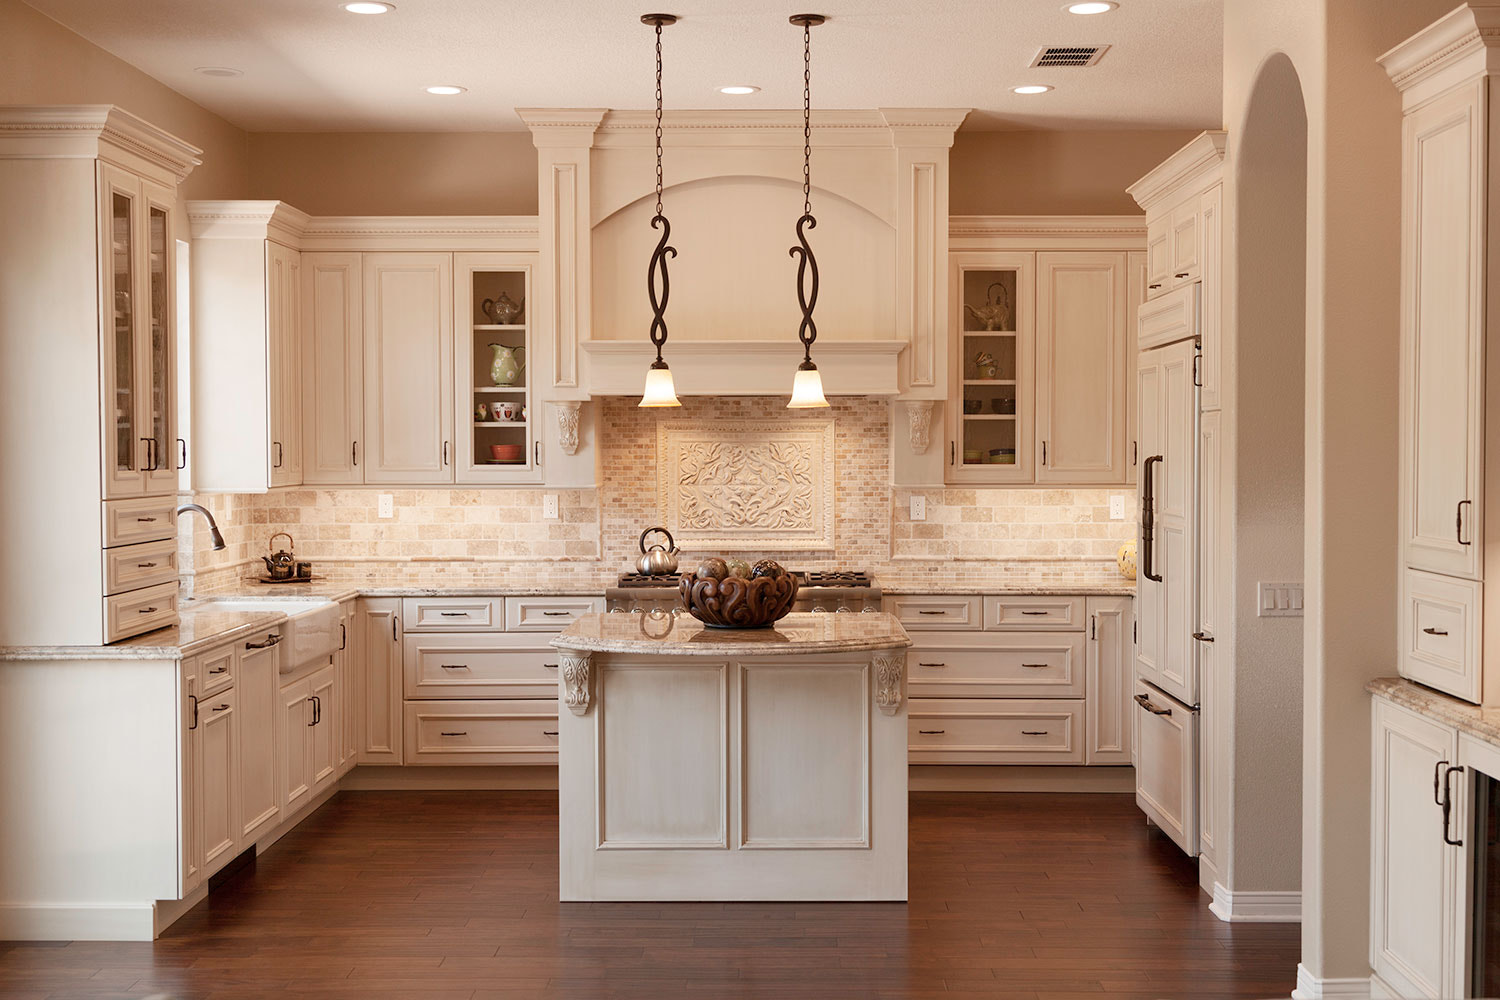 Trending Kitchens in San Diego County